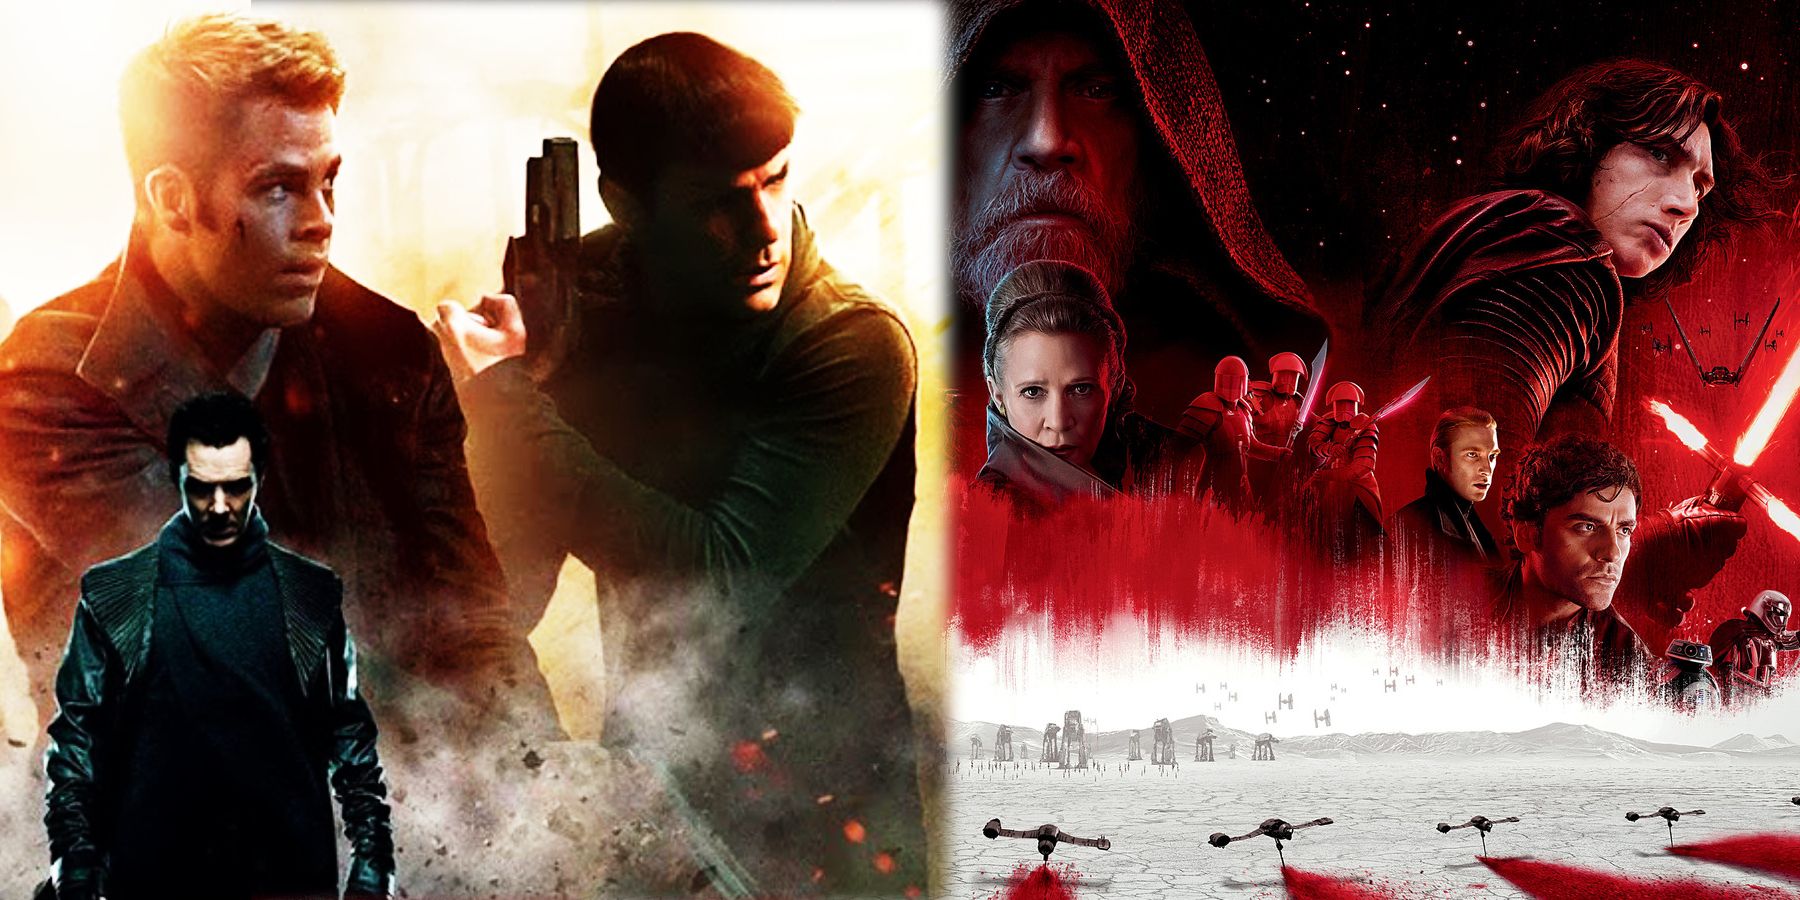 Promotional artwork for Star Trek Into Darkness and Star Wars: The Last Jedi